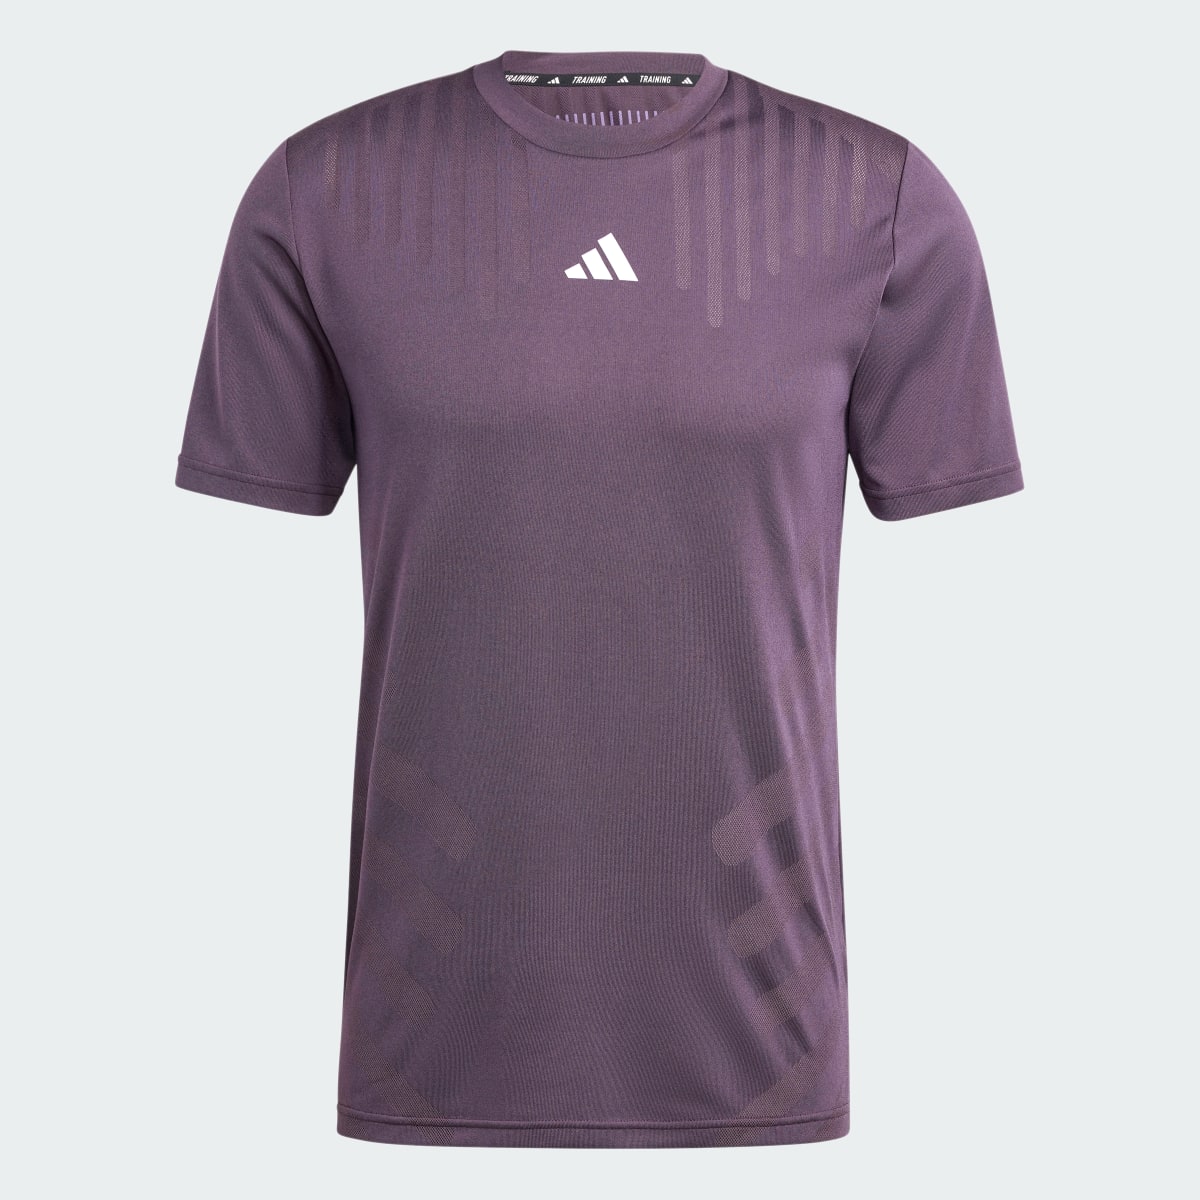 Adidas HIIT Airchill Workout Tee. 5